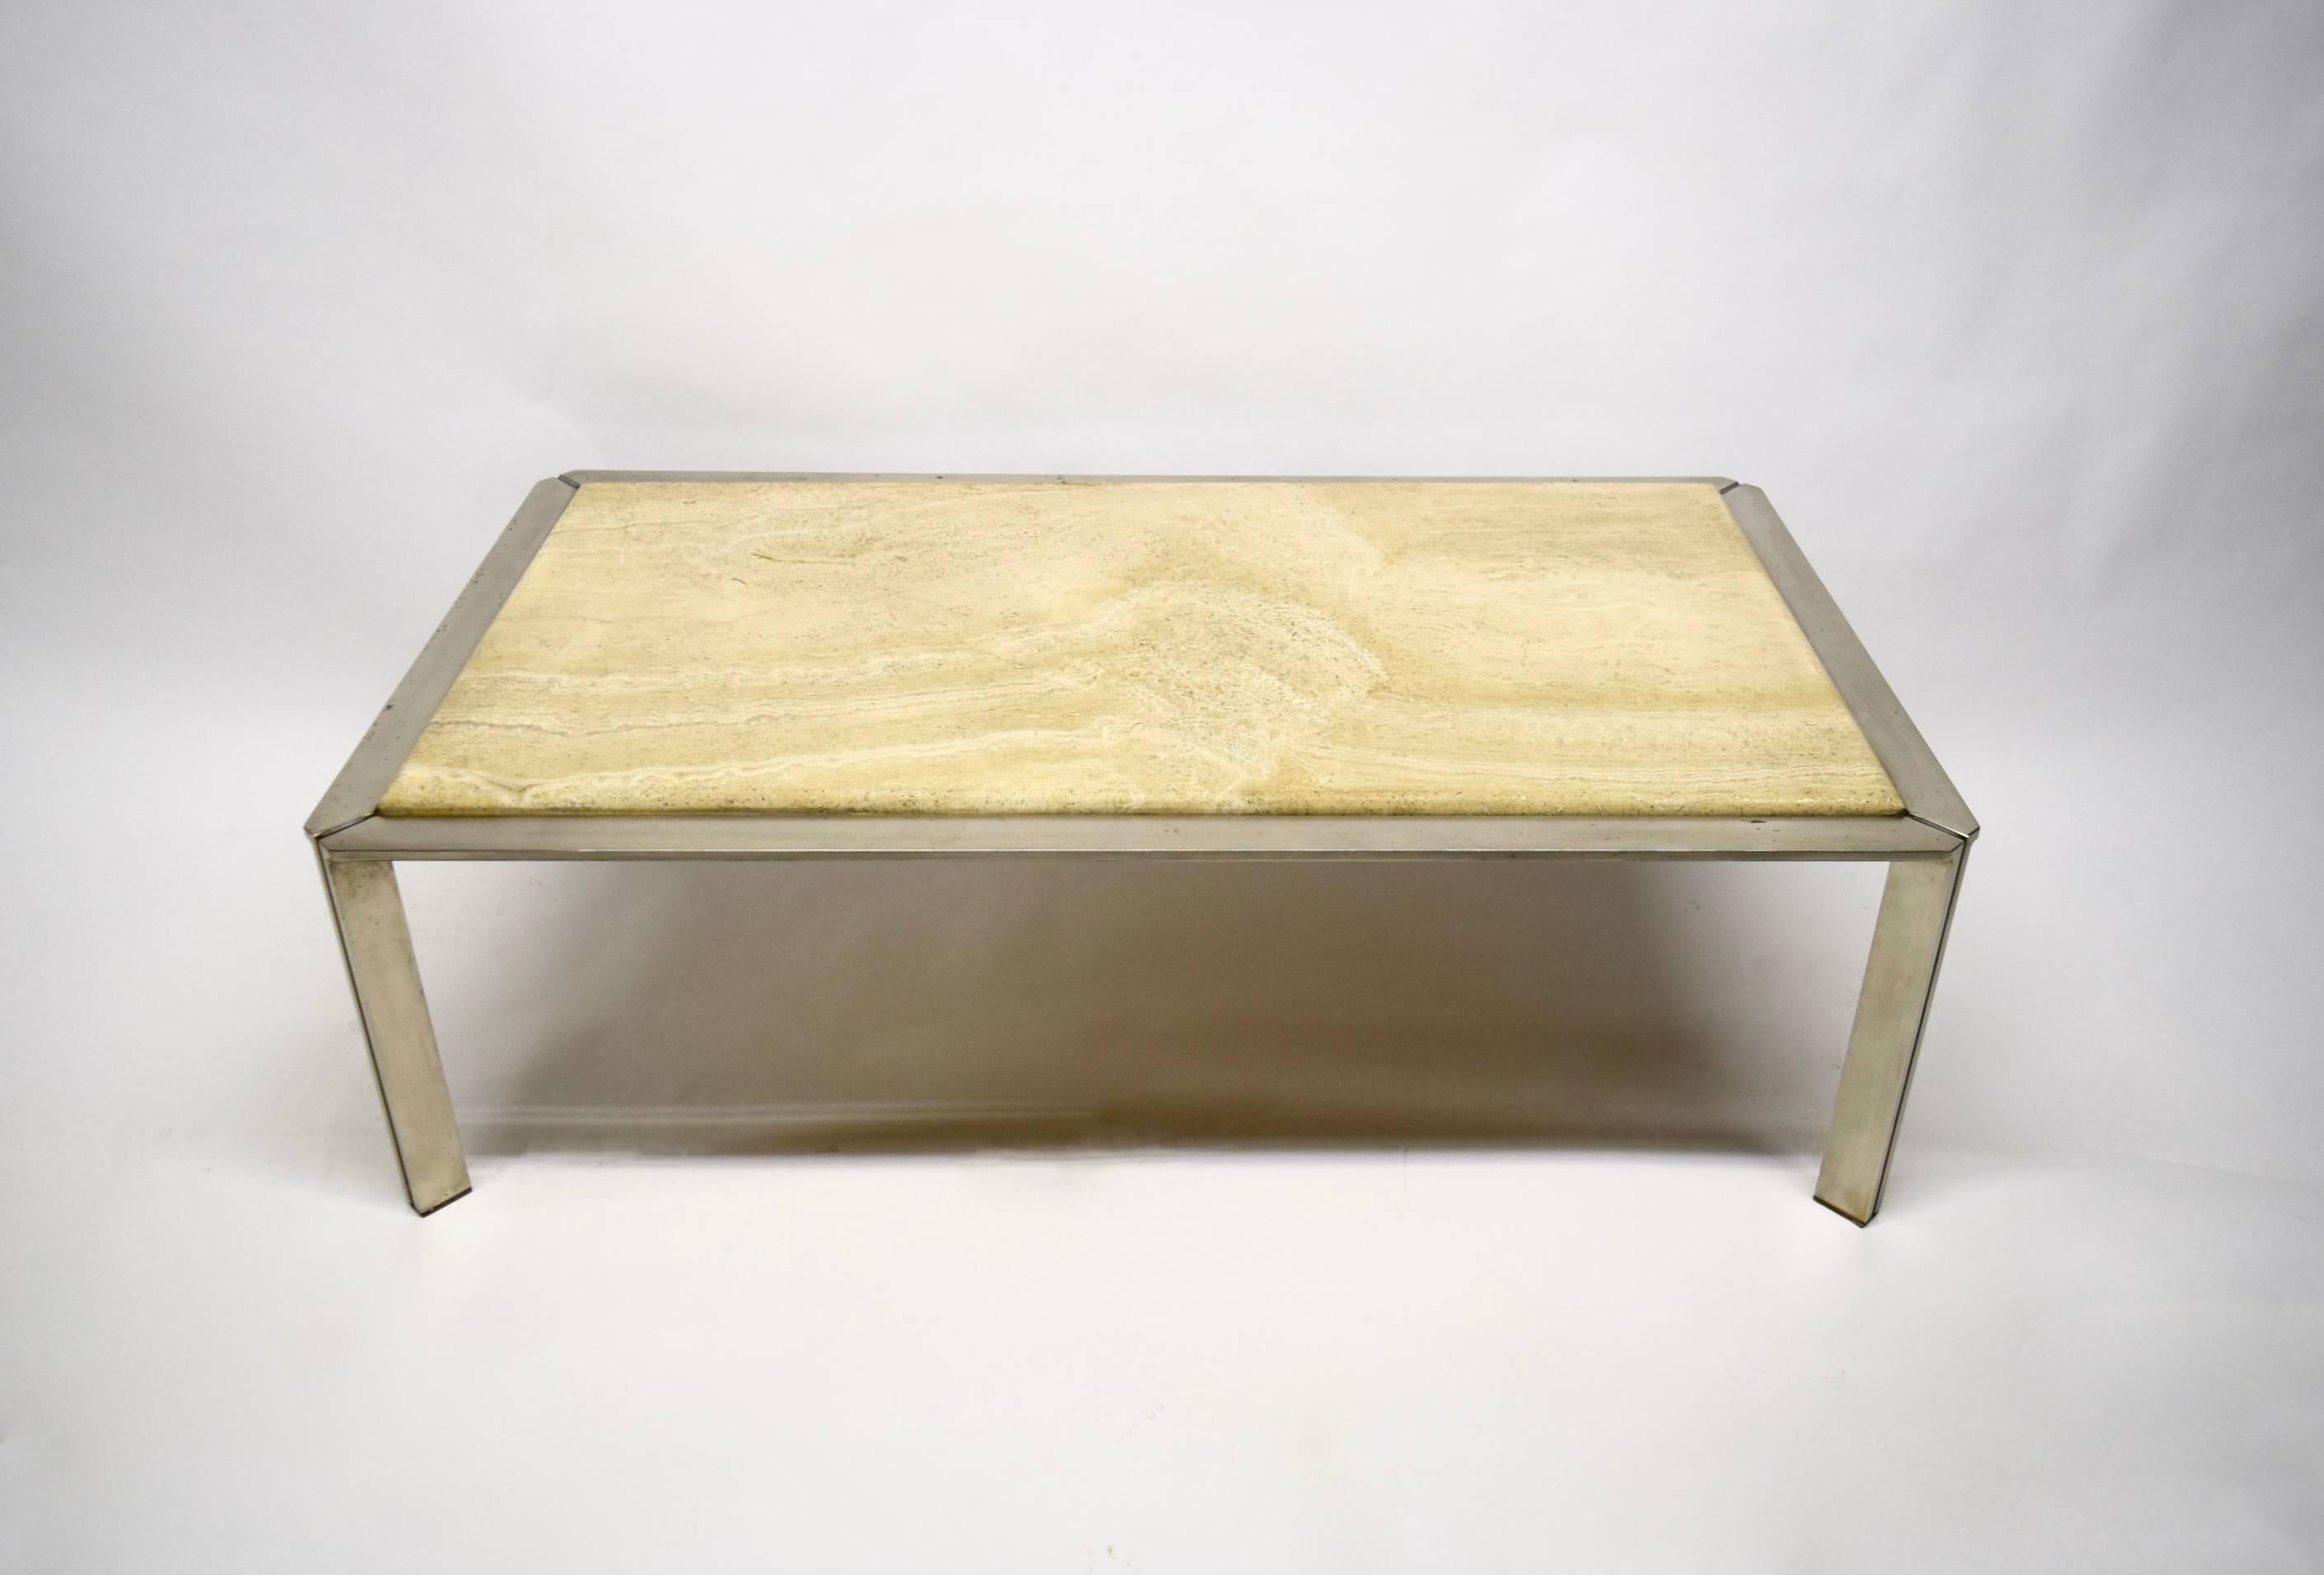 Mid-Century Modern Steel Coffee Table with a Travertine Top circa 1970, made in France For Sale